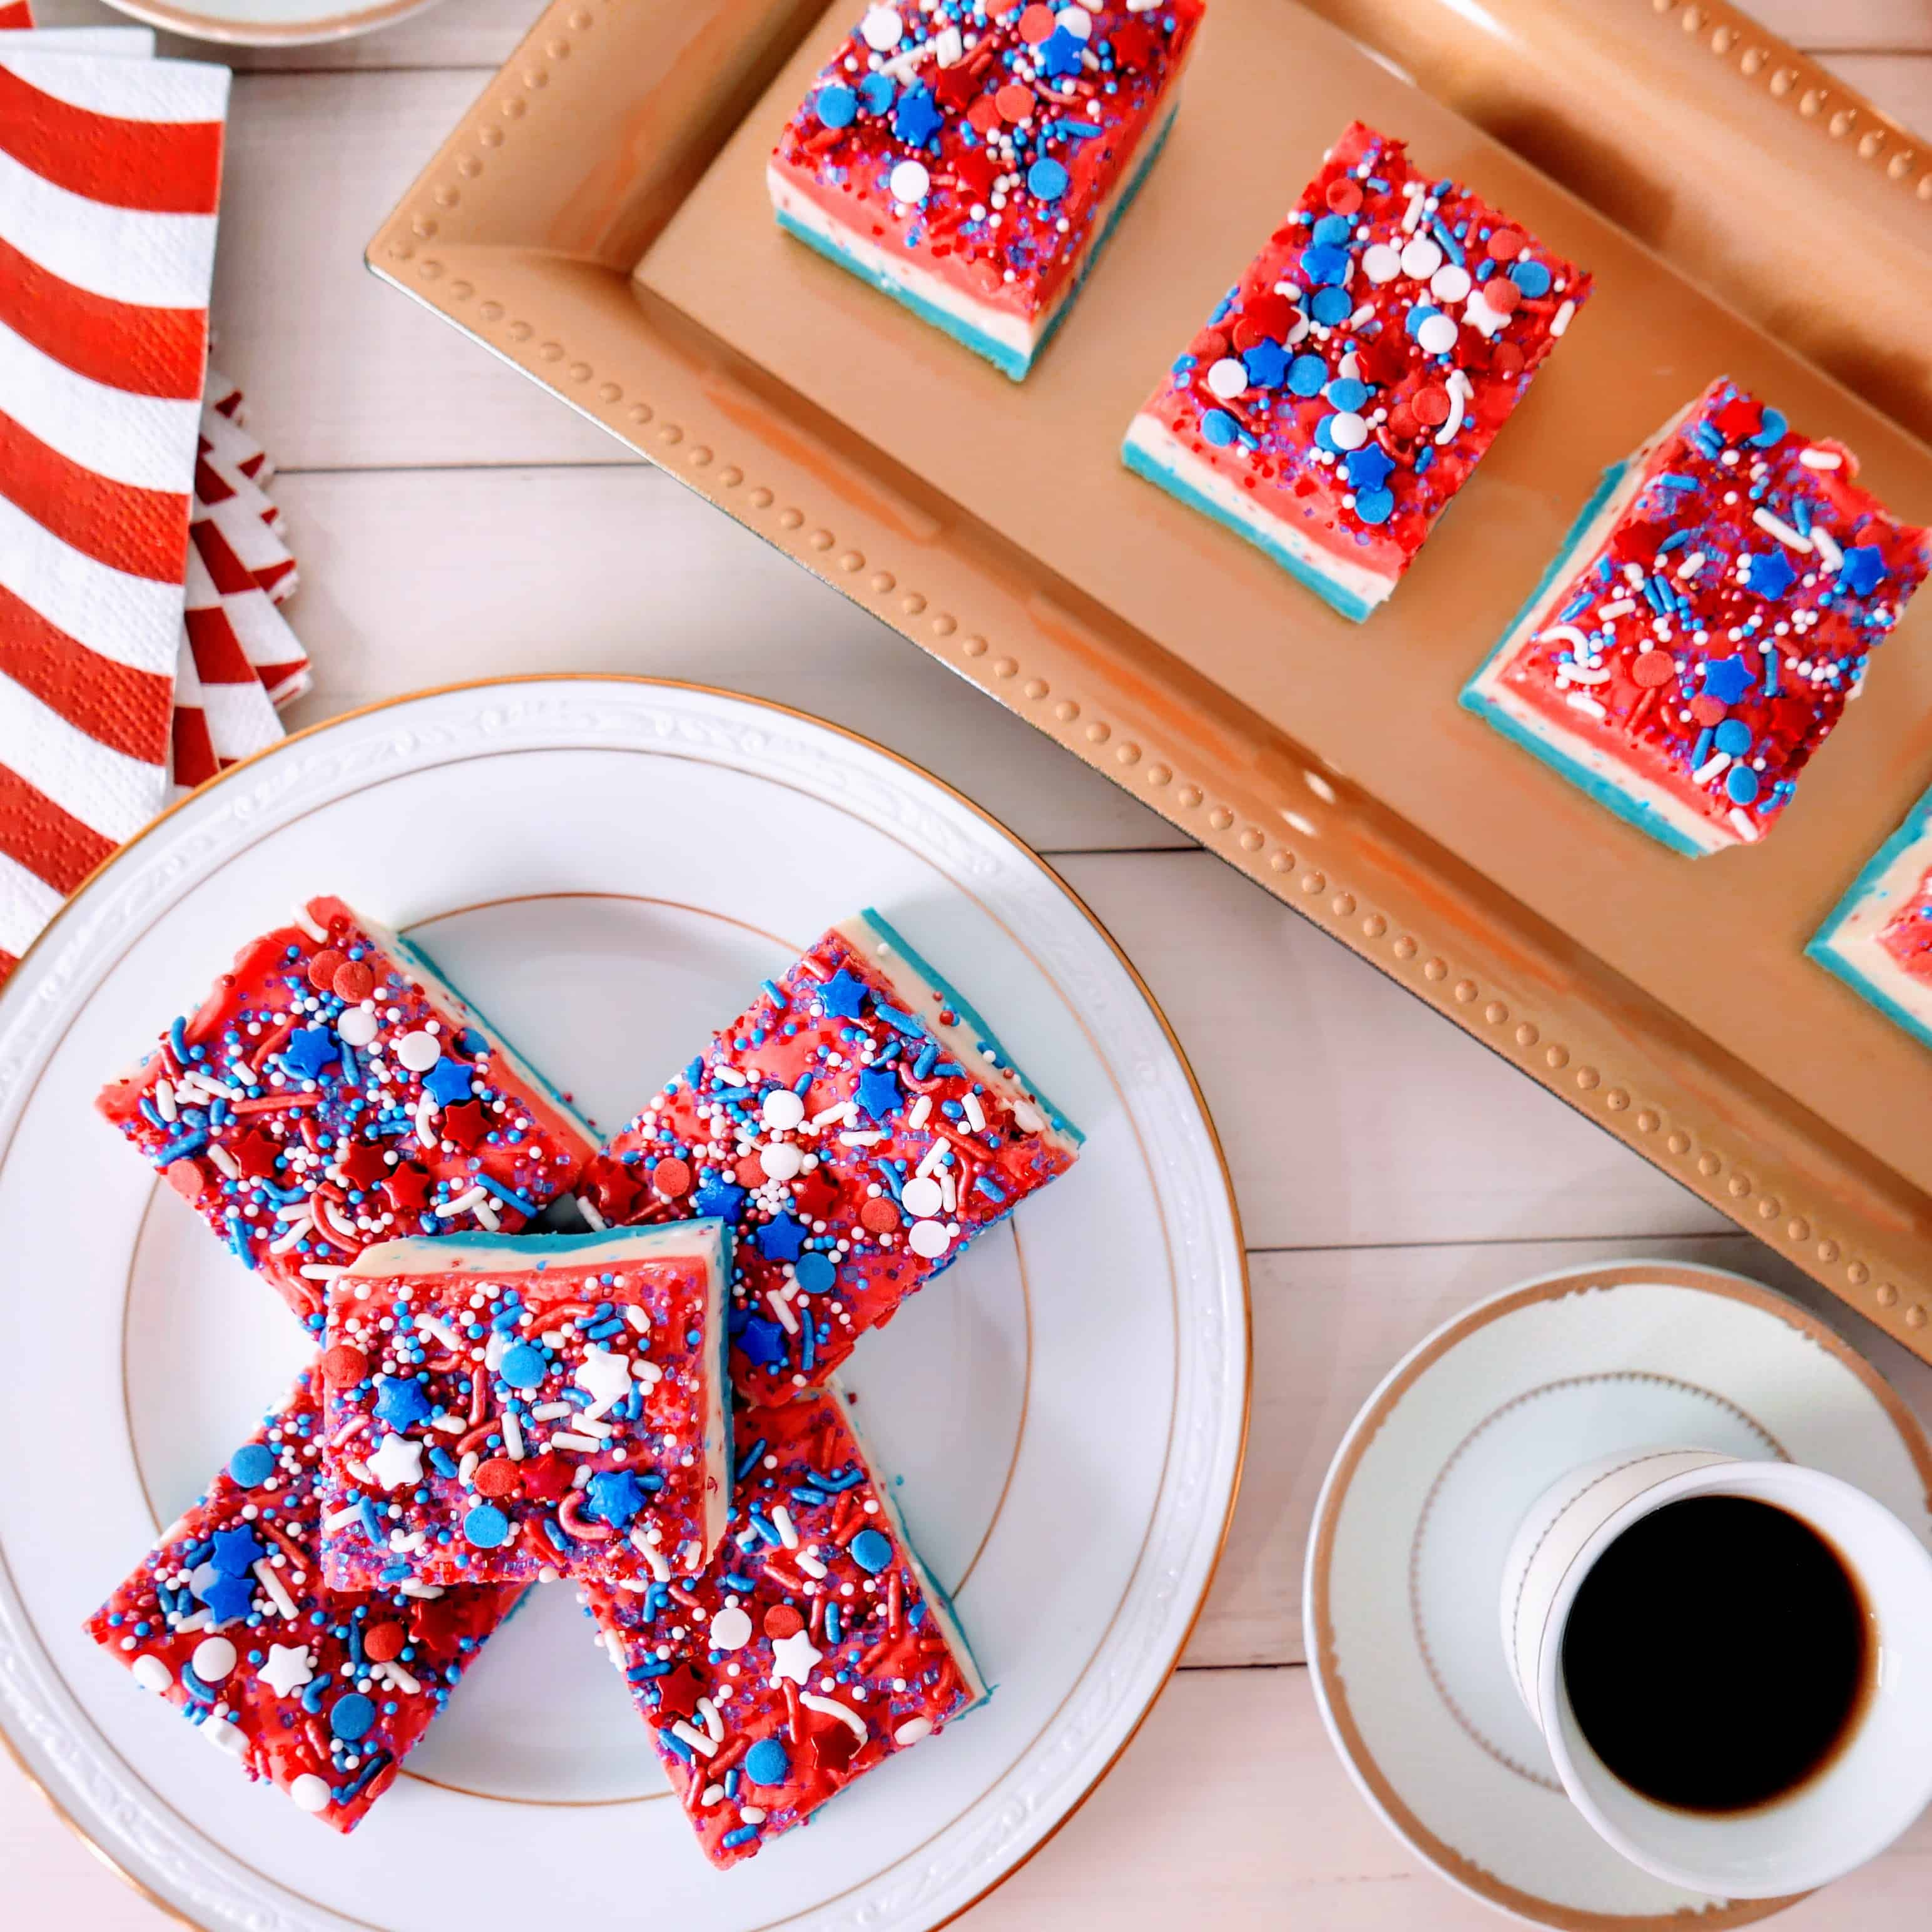 cut pieces of red, white, and blue fudge